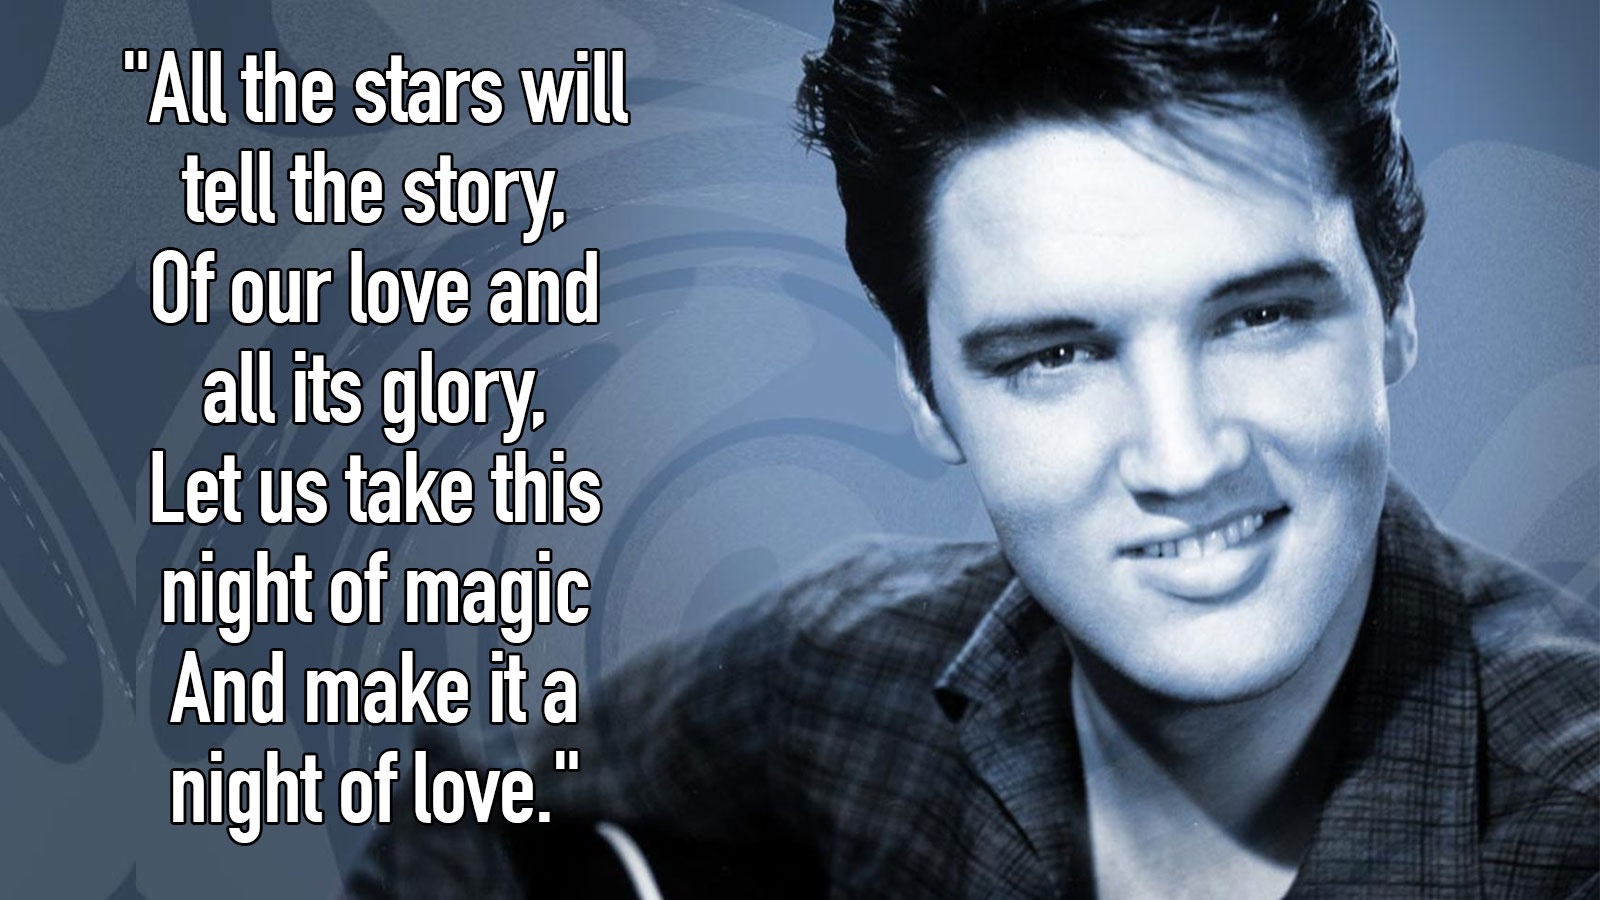 Can You Guess the Elvis Presley Song This Lyric Is From? Quiz 111